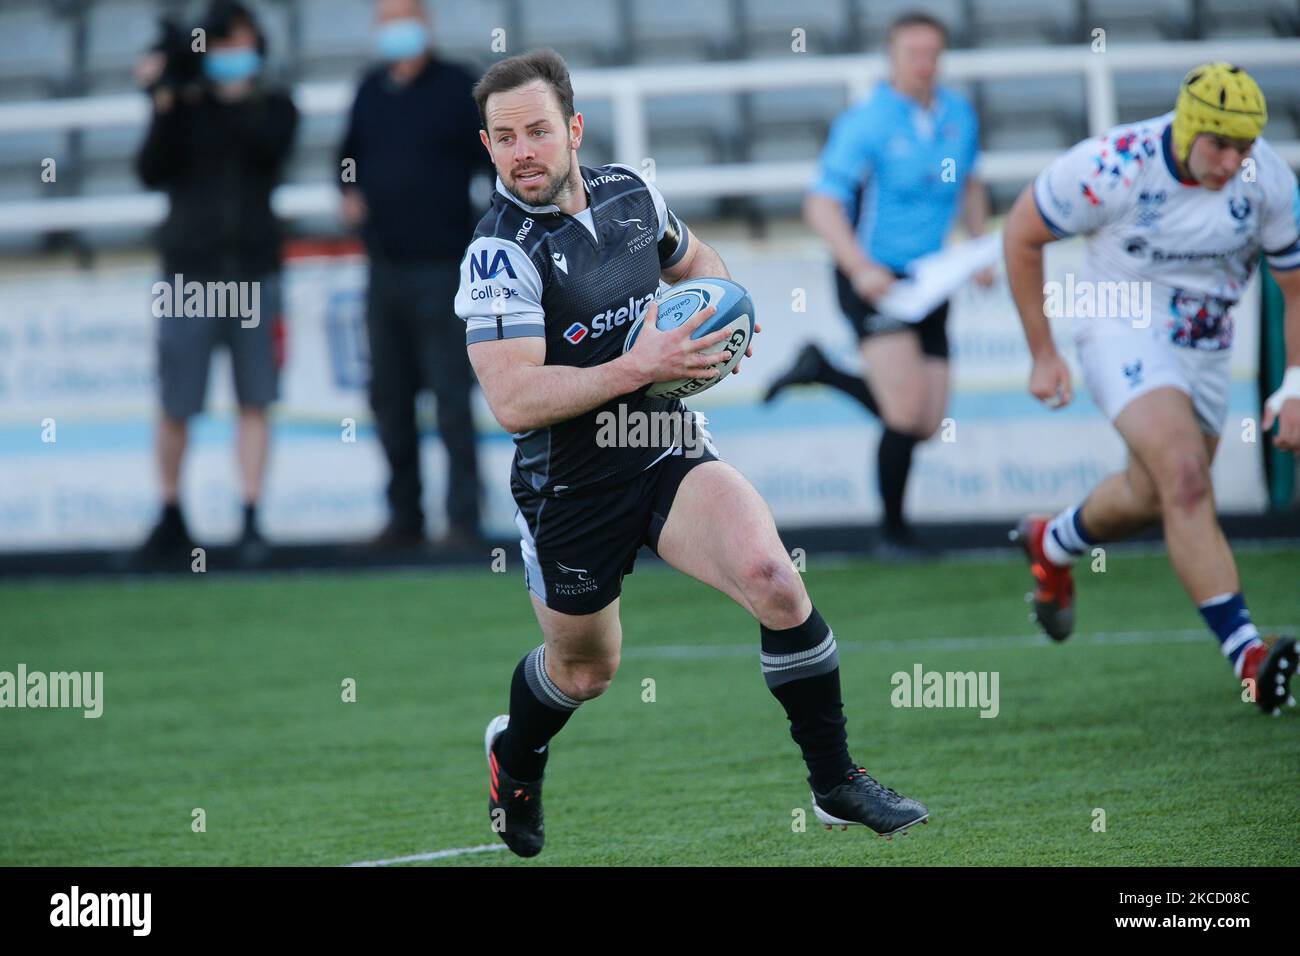 Michael Young of Newcastle Falcons intercepts and races in to score during the Gallagher Premiership match between Newcastle Falcons and Bristol at Kingston Park, Newcastle, England on 17th April 2021. (Photo by Chris Lishman/MI News/NurPhoto) Stock Photo